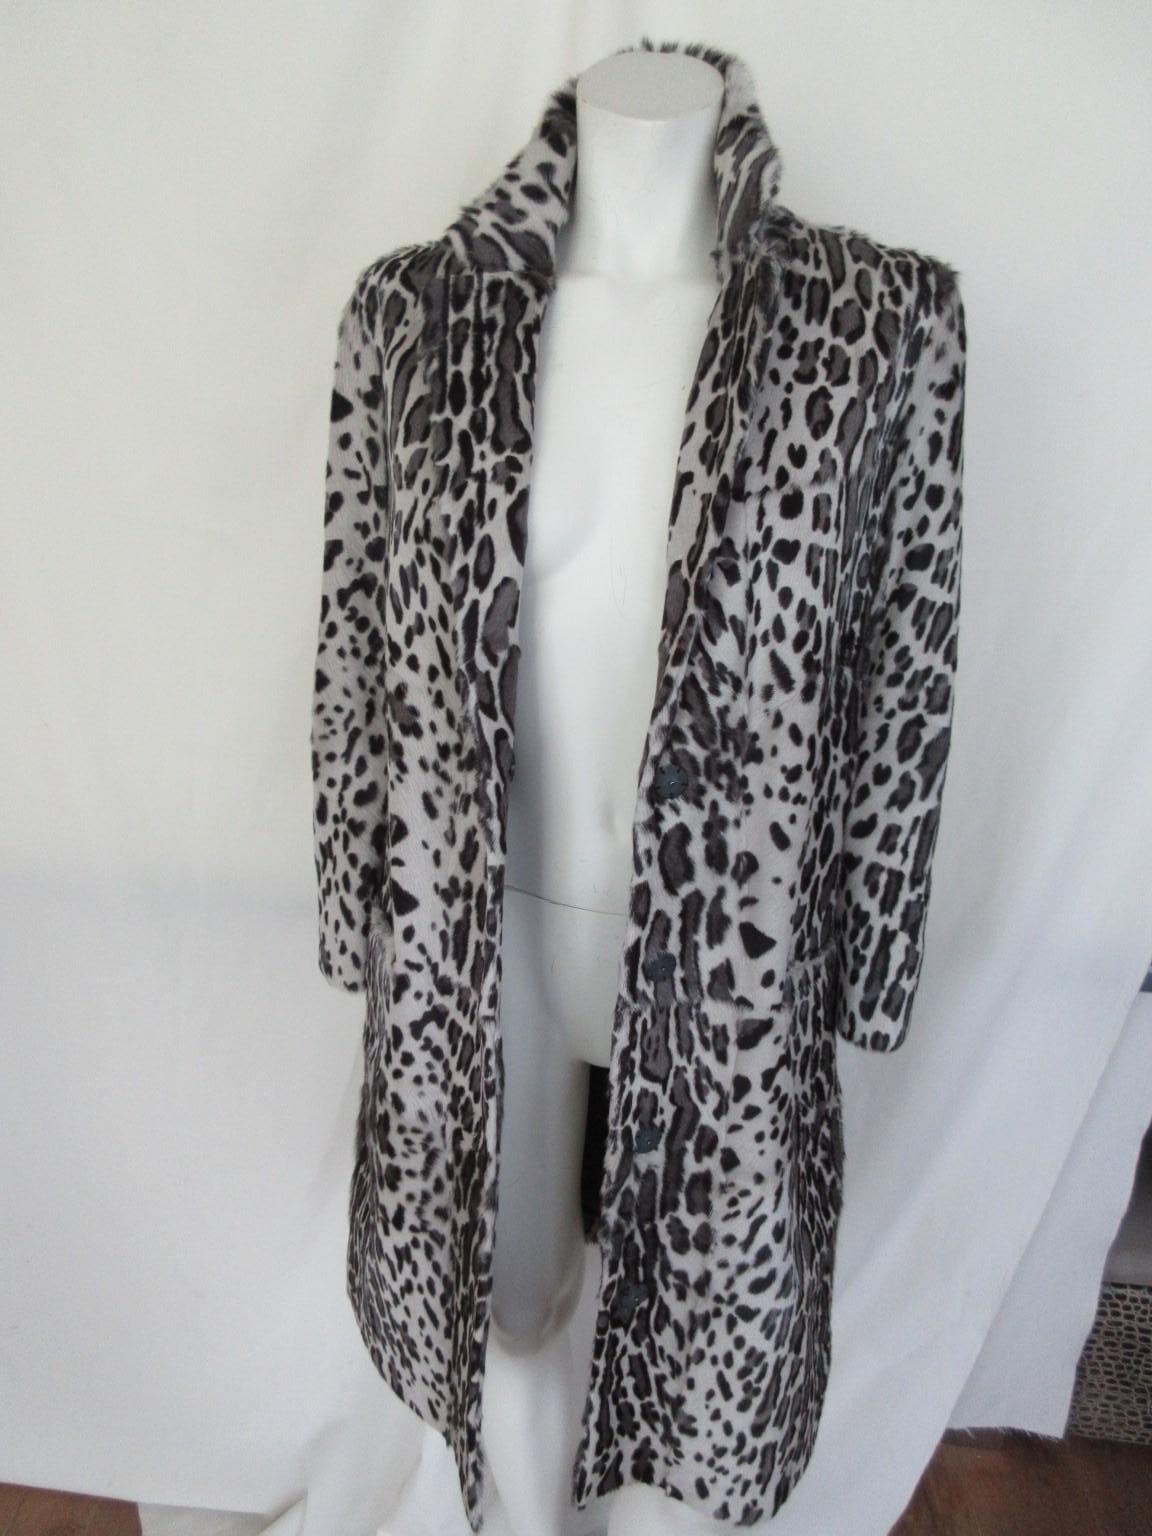 Exclusive Yves Salomon Paris leopard printed naturel goat fur coat

We offer more exclusive fur items, view our front store

Details:
made of soft naturel goat fur and very easy and light to wear
color; black /grey 
2 pockets, 3 press buttons, 